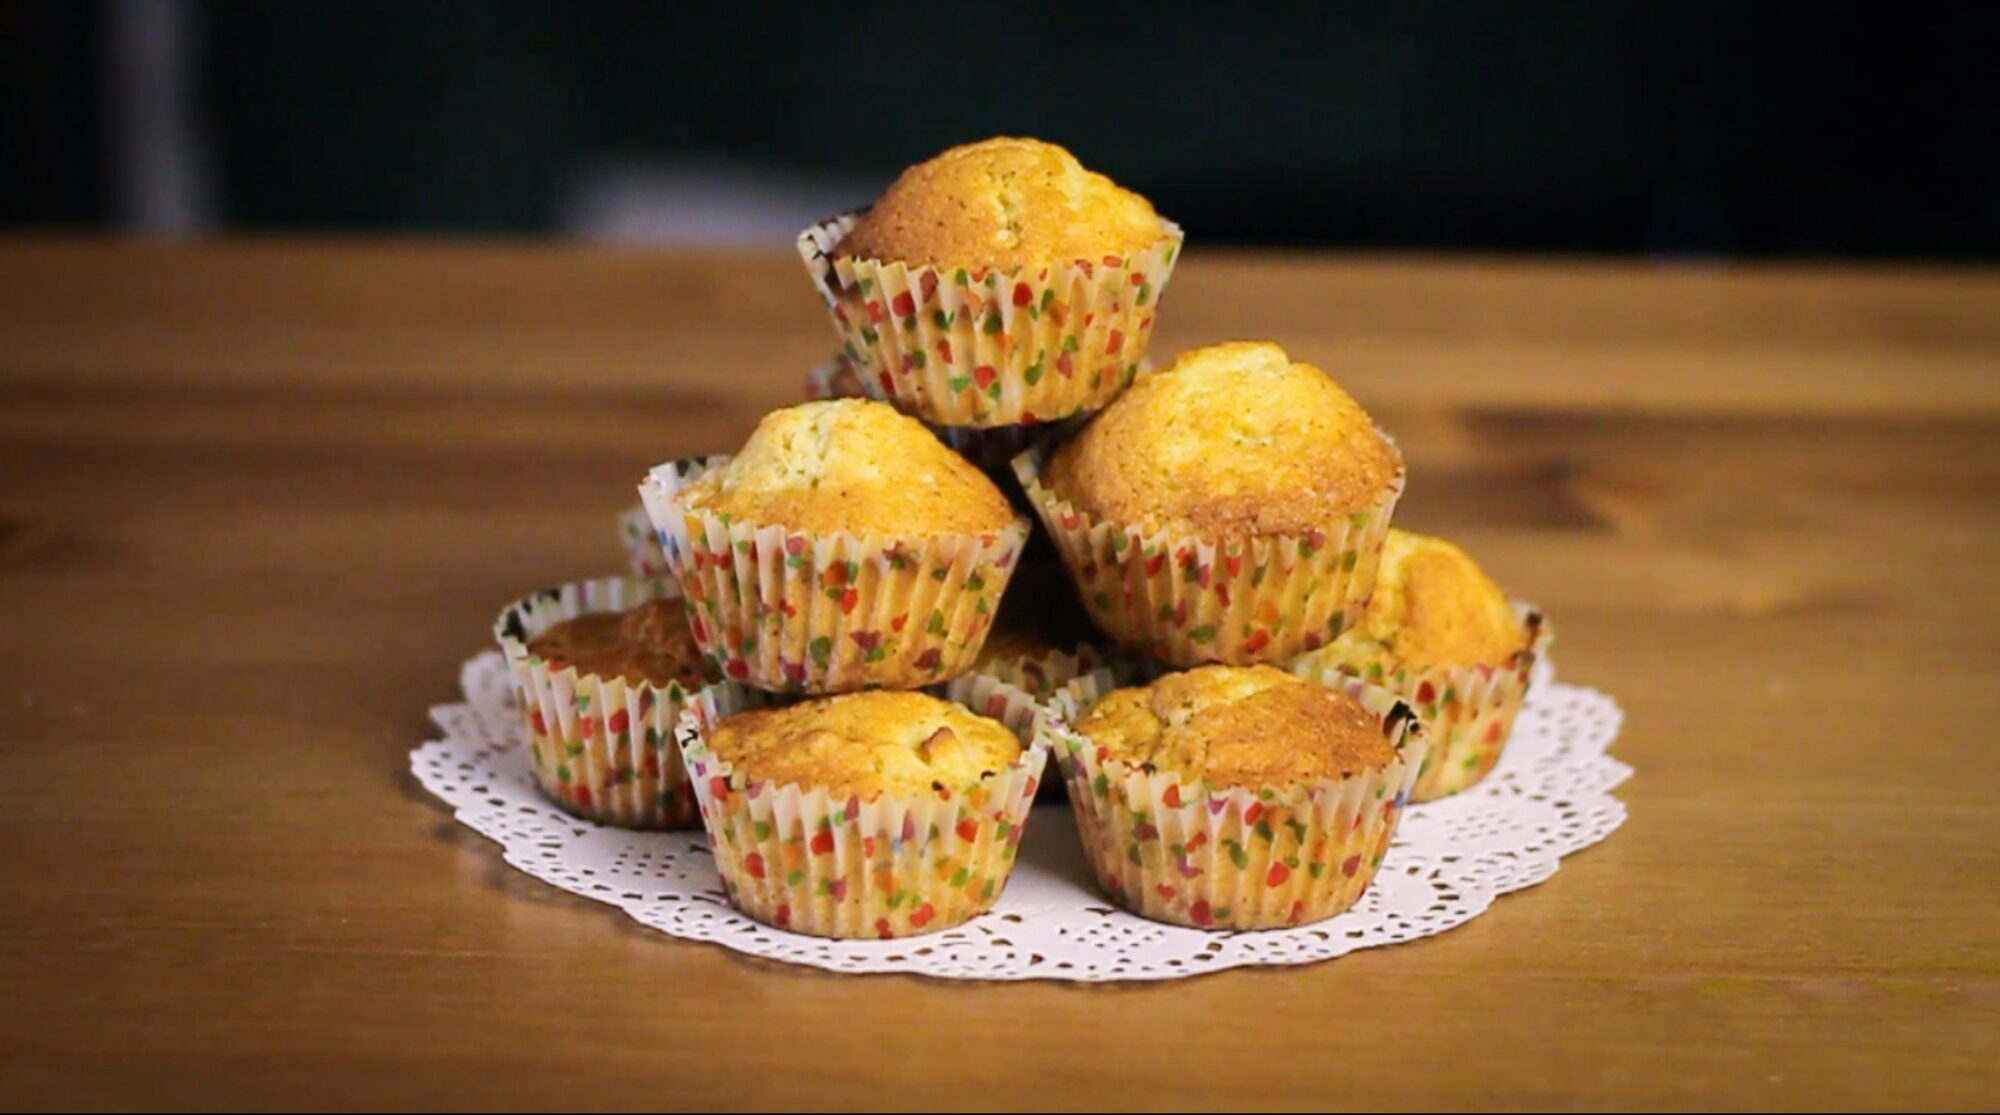 muffins on plate